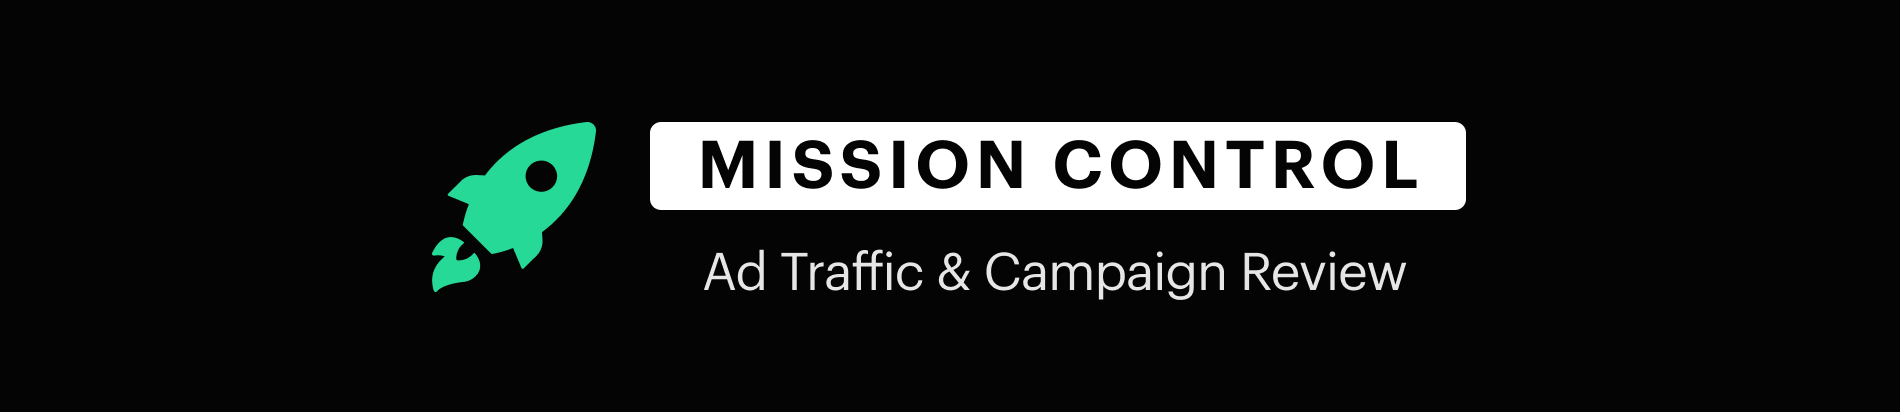 Hulu Mission Control: Ad Traffic and Campaign Review